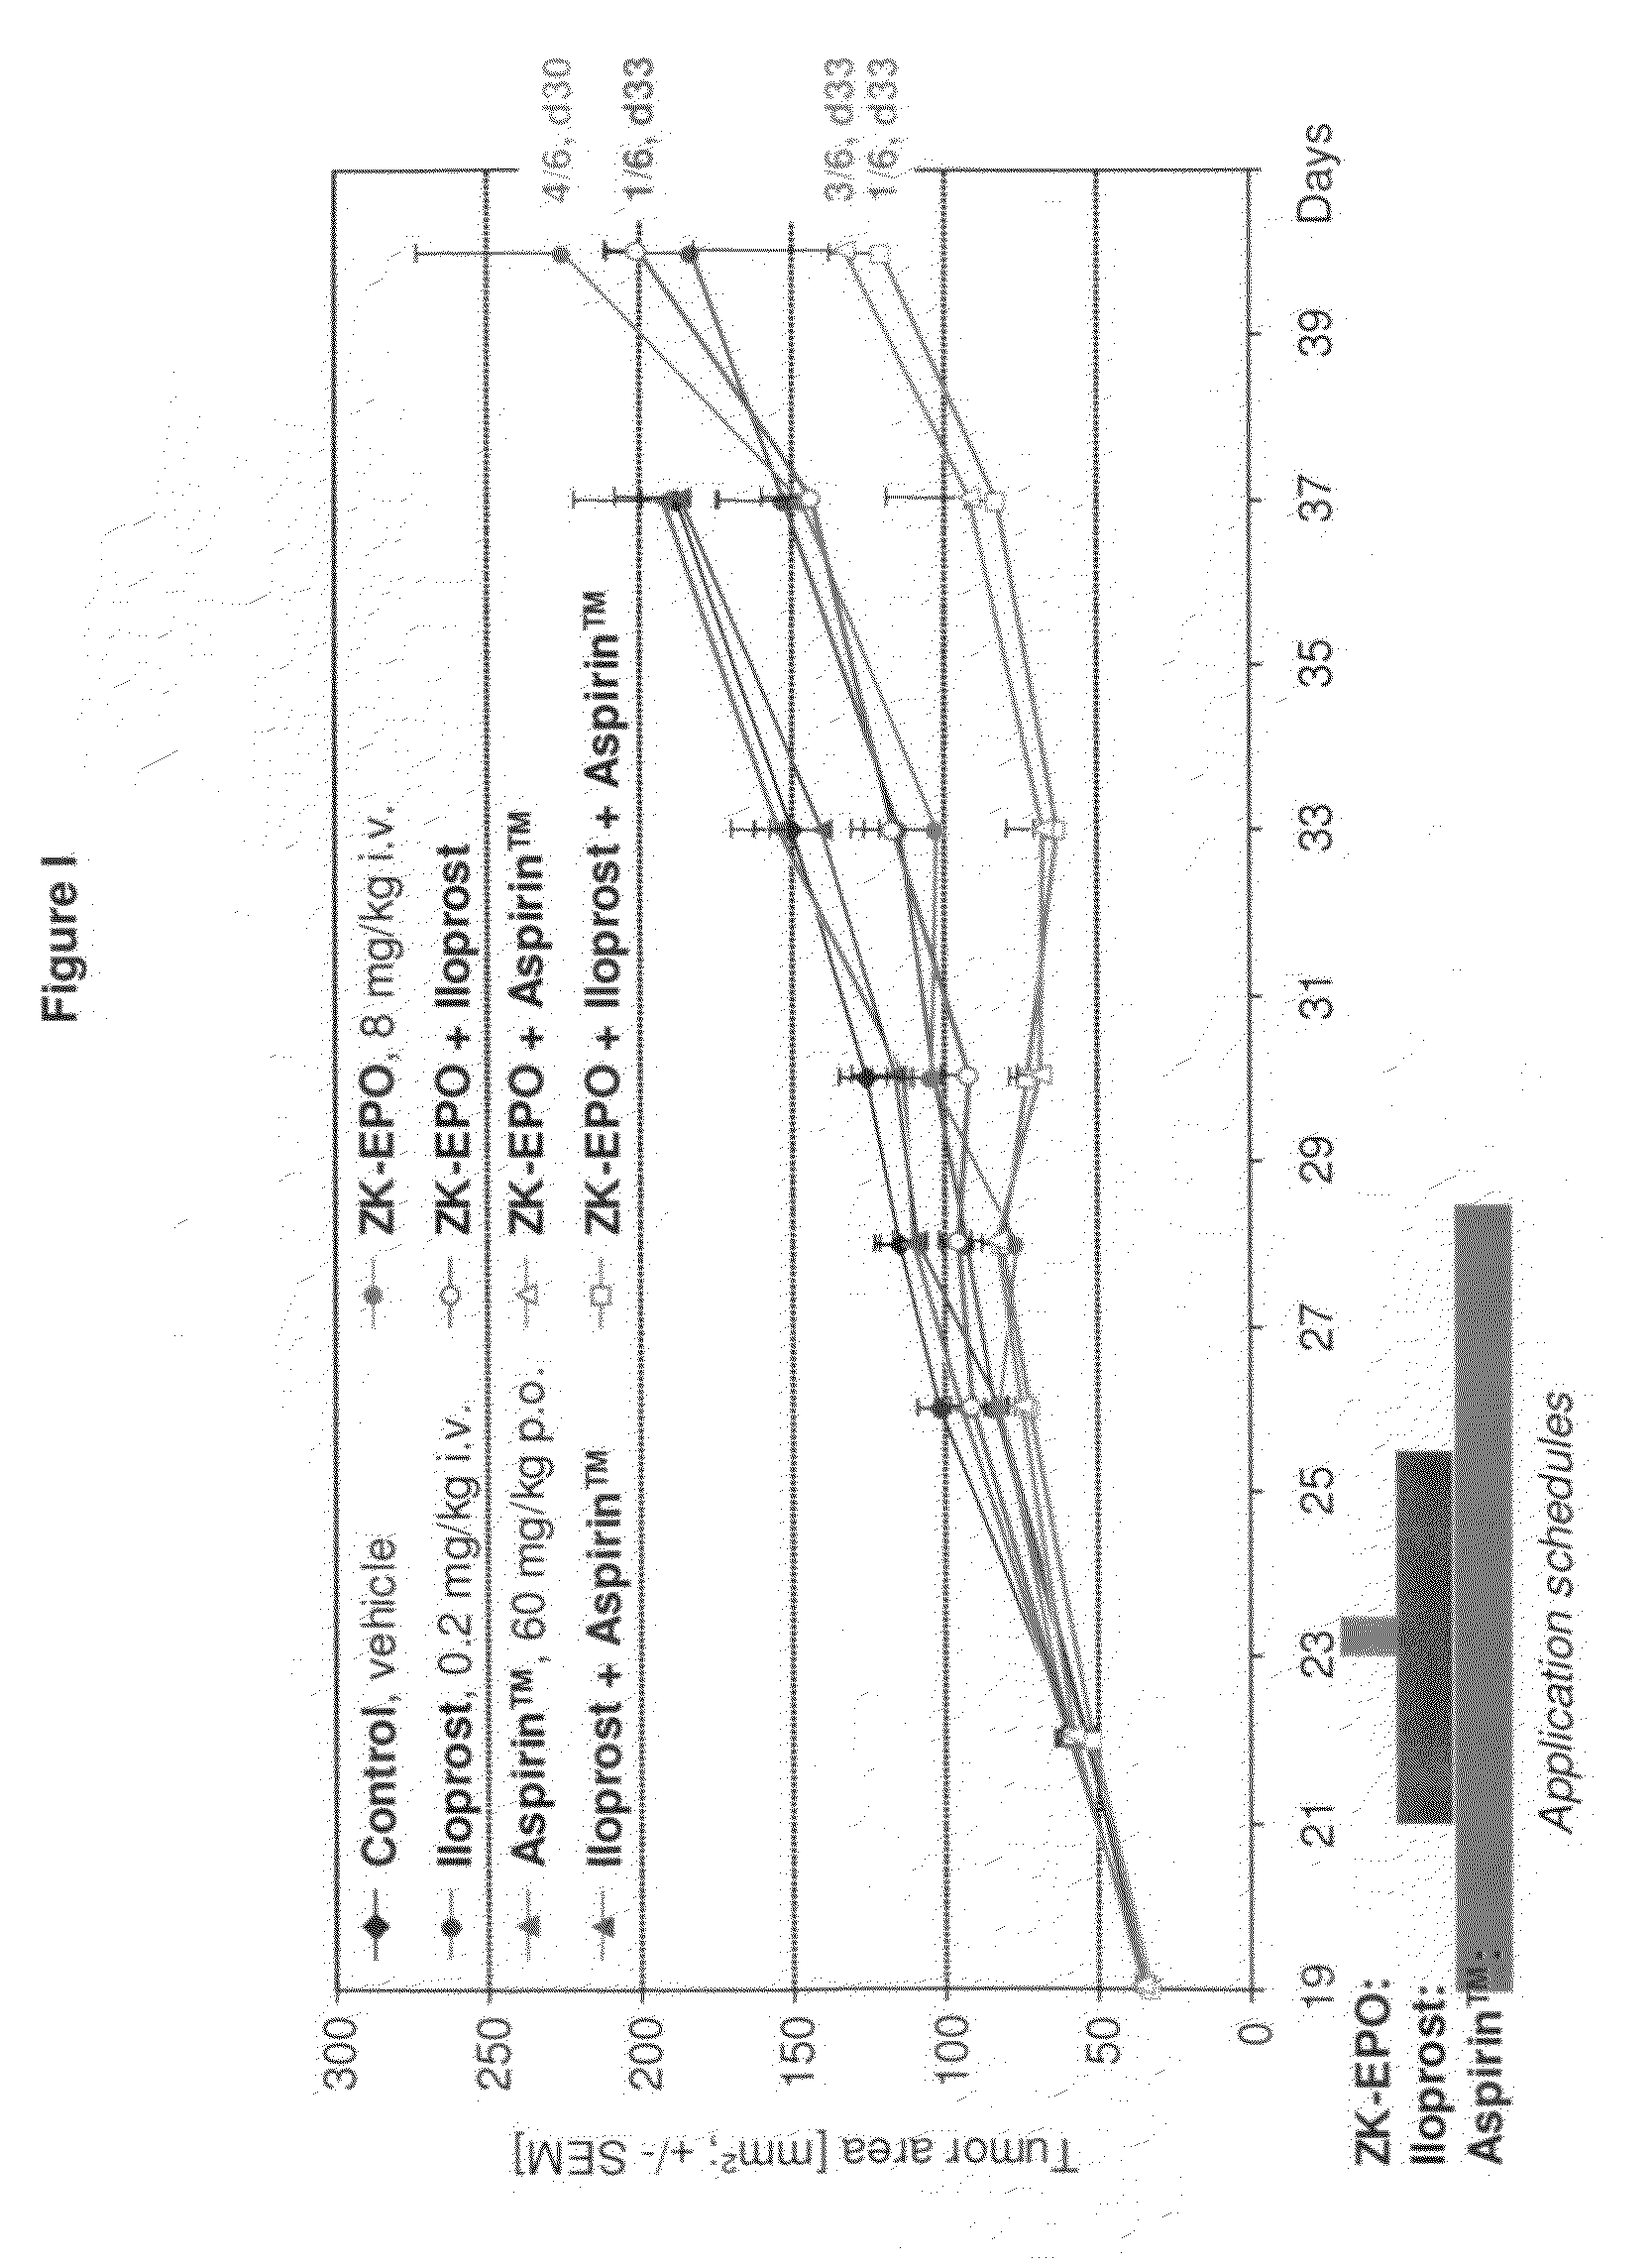 Combinations comprising a prostaglandin and uses thereof